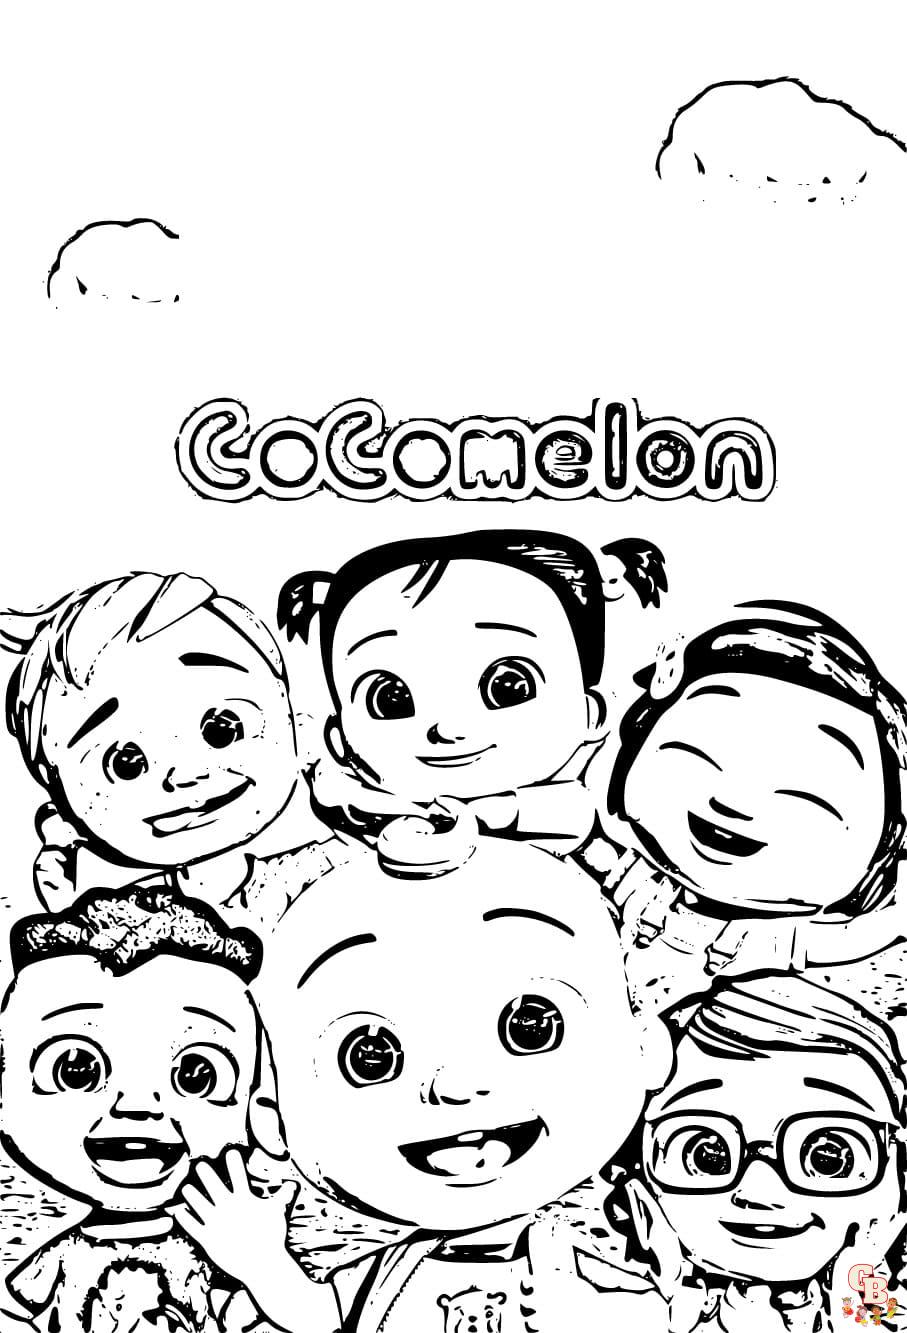 cocomelon coloring pages easy